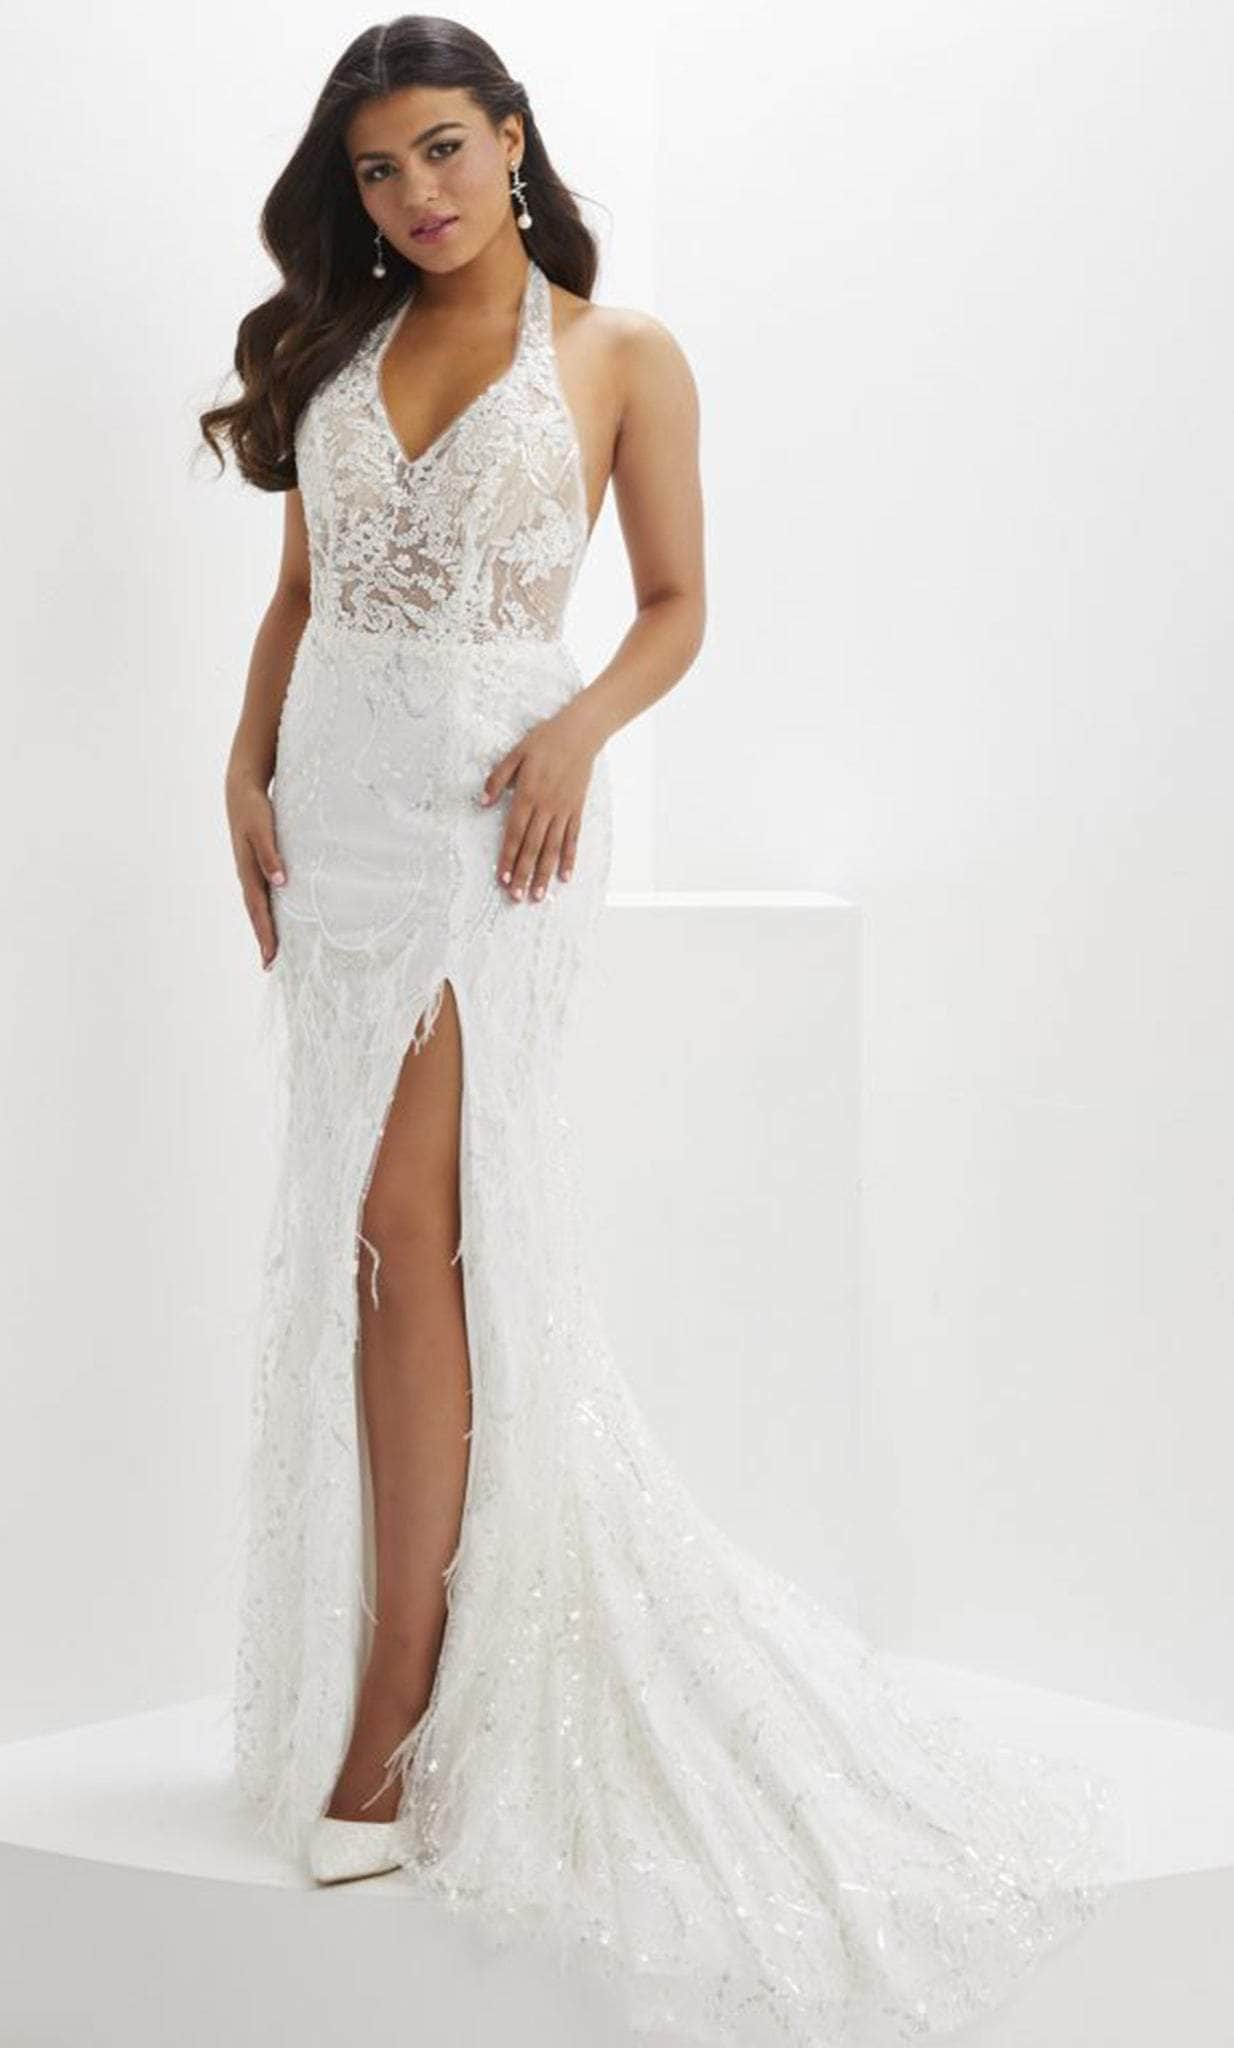 Image of Panoply 14144 - Halter Beaded Lace Evening Gown